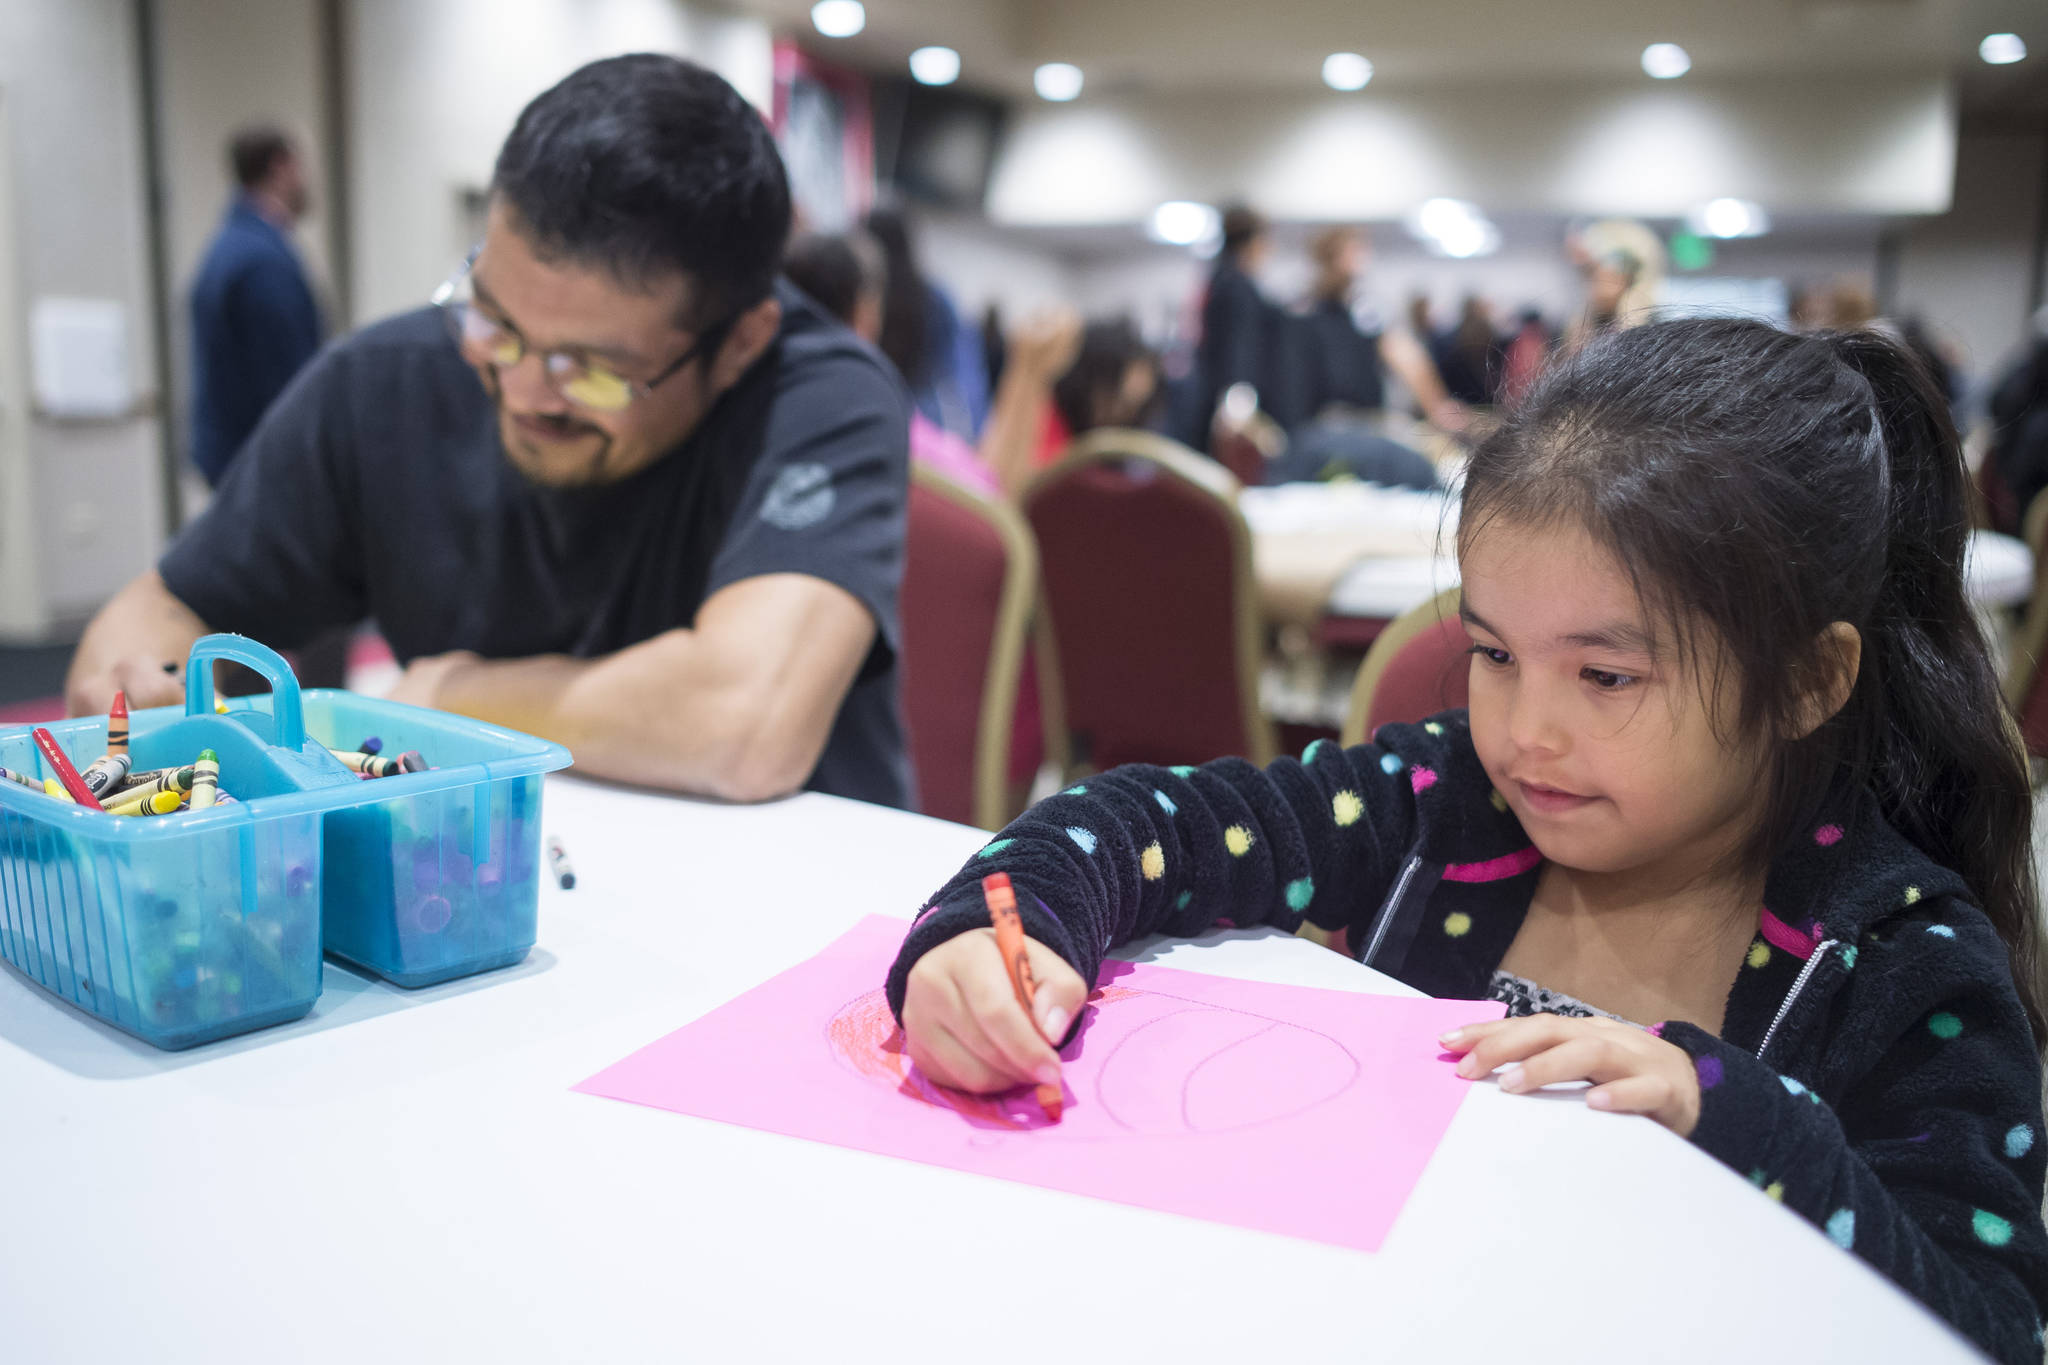 Carl Stepetin draws with his daughter, Pauline, 6, during a Celebrate Survivors gathering sponsored by Central Council Tlingit and Haida Indian Tribes of Alaska and AWARE in the Elizabeth Peratrovich Hall on Tuesday, Oct. 23, 2018. October is Domestic Violence Awareness Month. (Michael Penn | Juneau Empire)